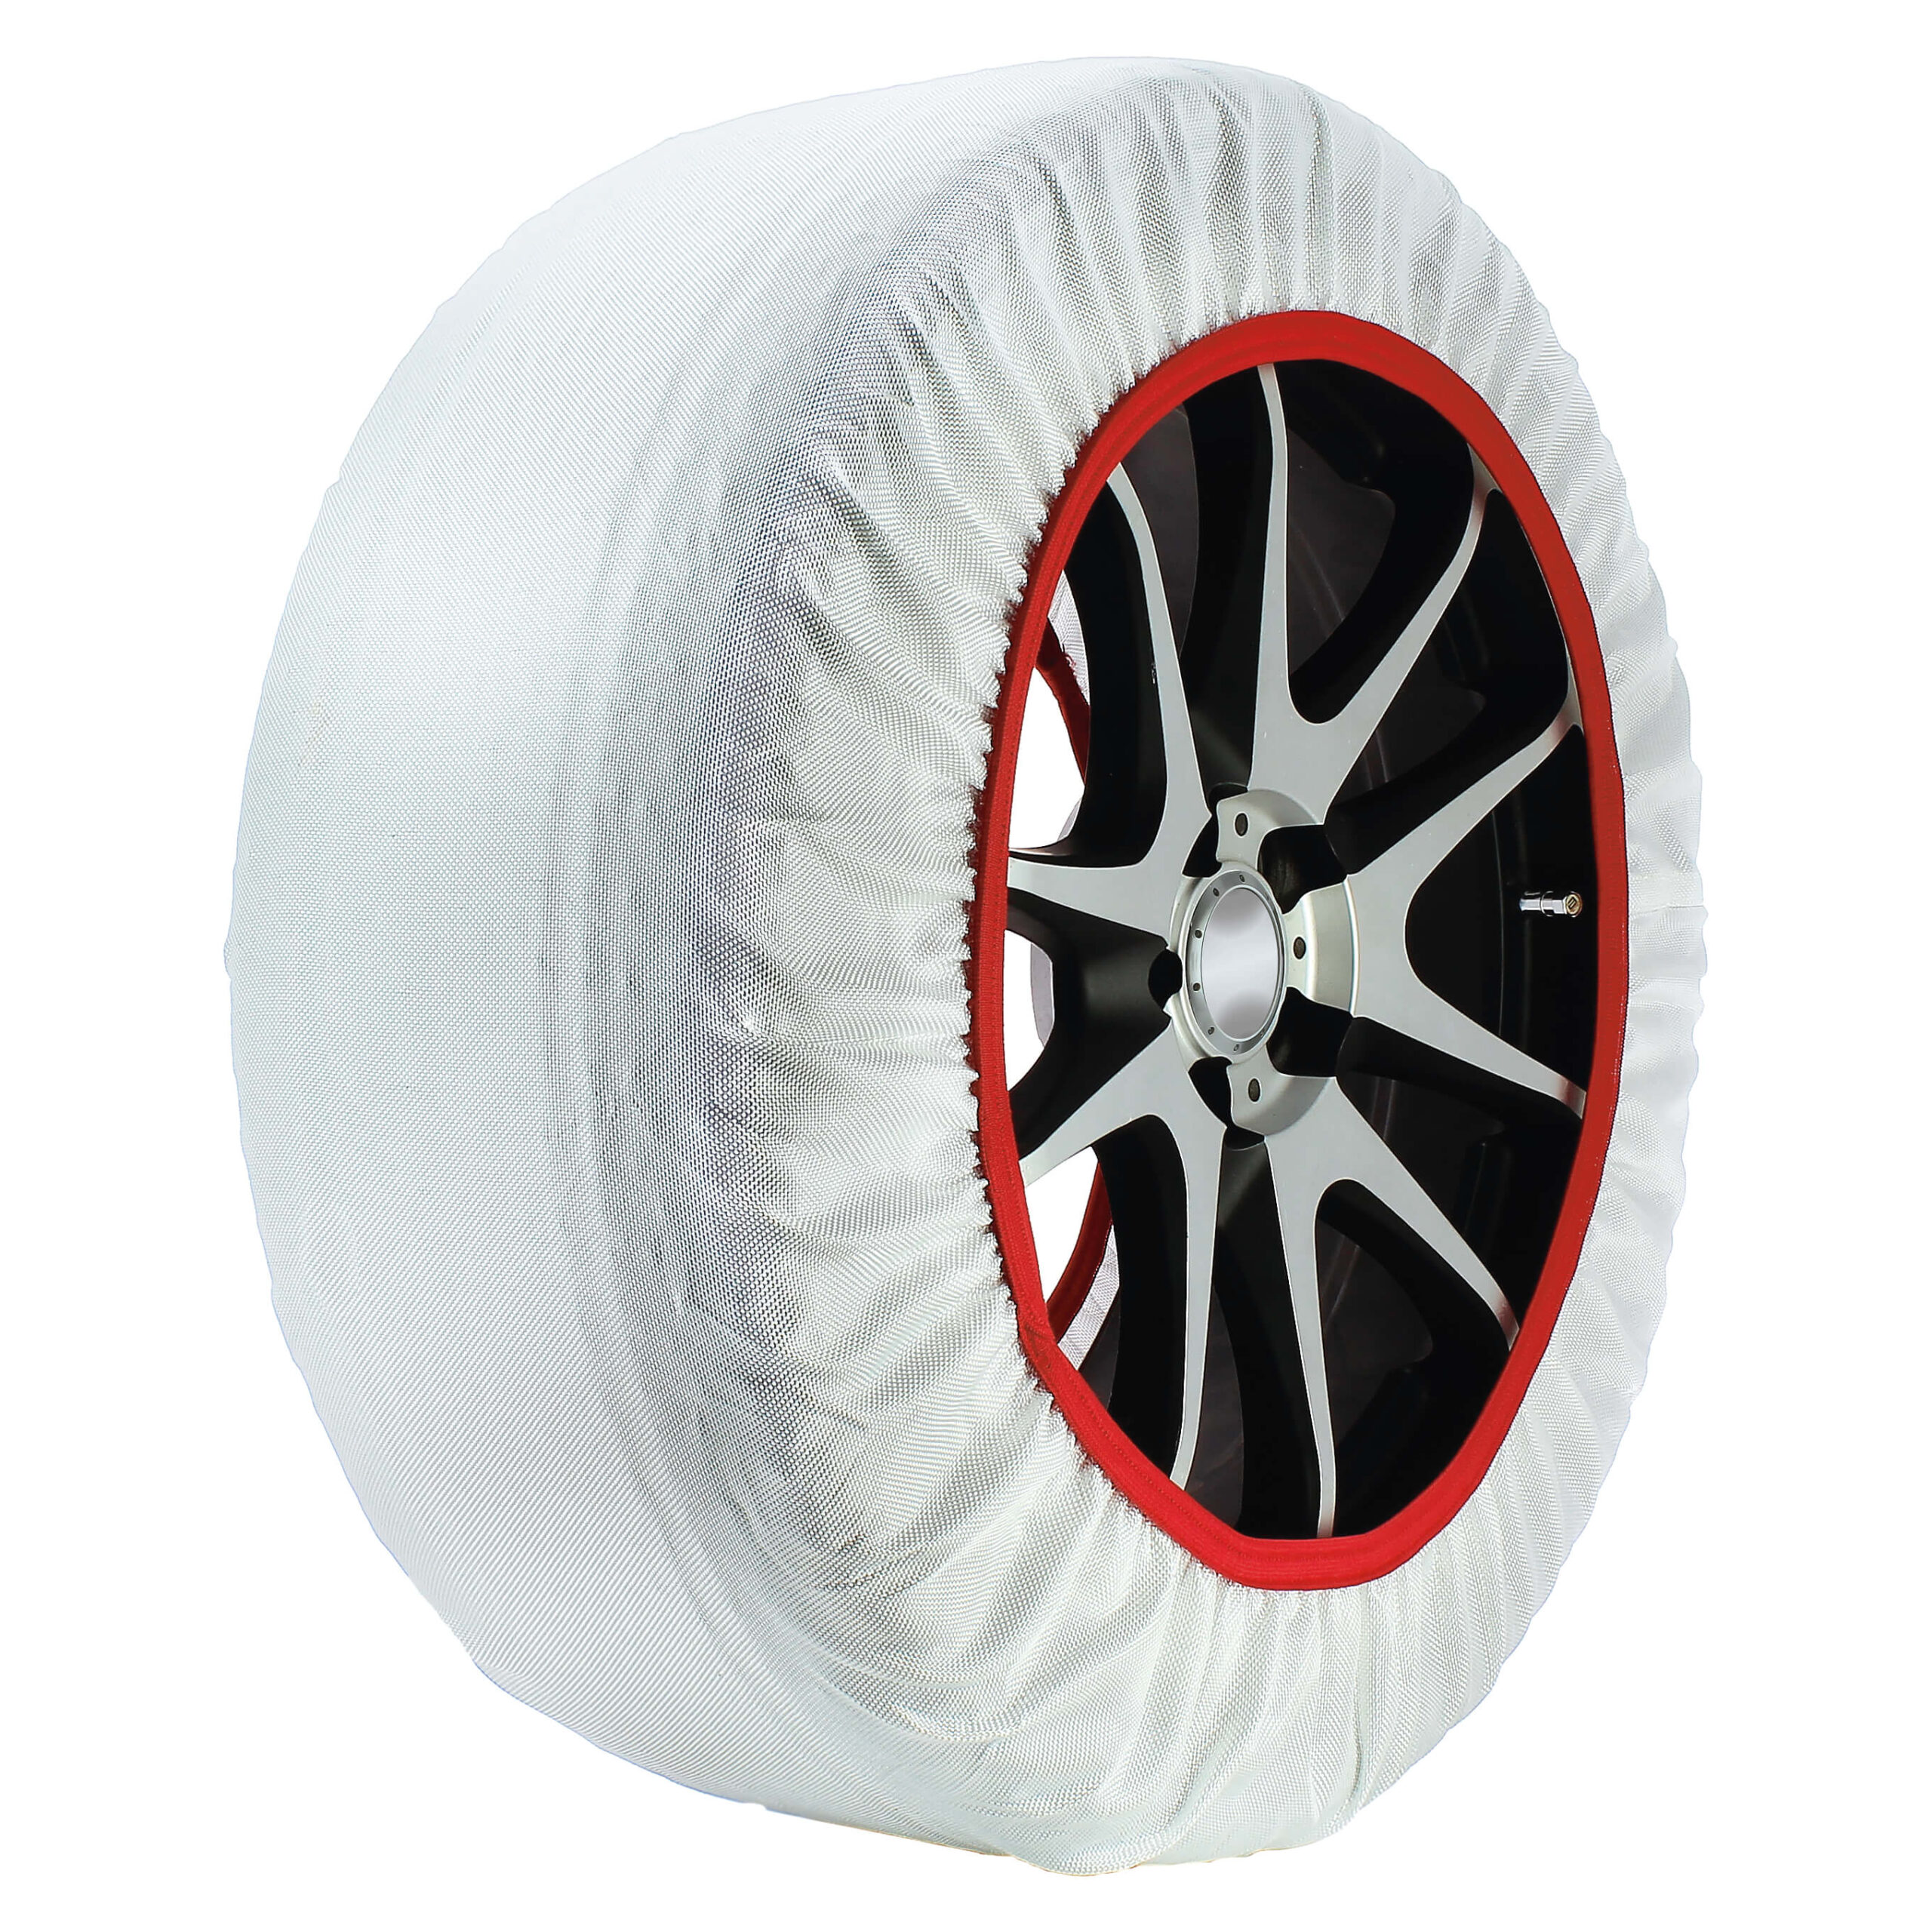 Husky Sumex Winter Textile Car Wheel Ice RED & WHITE 235/55 R19 Frost & Snow Chain Socks for 19 Tyres